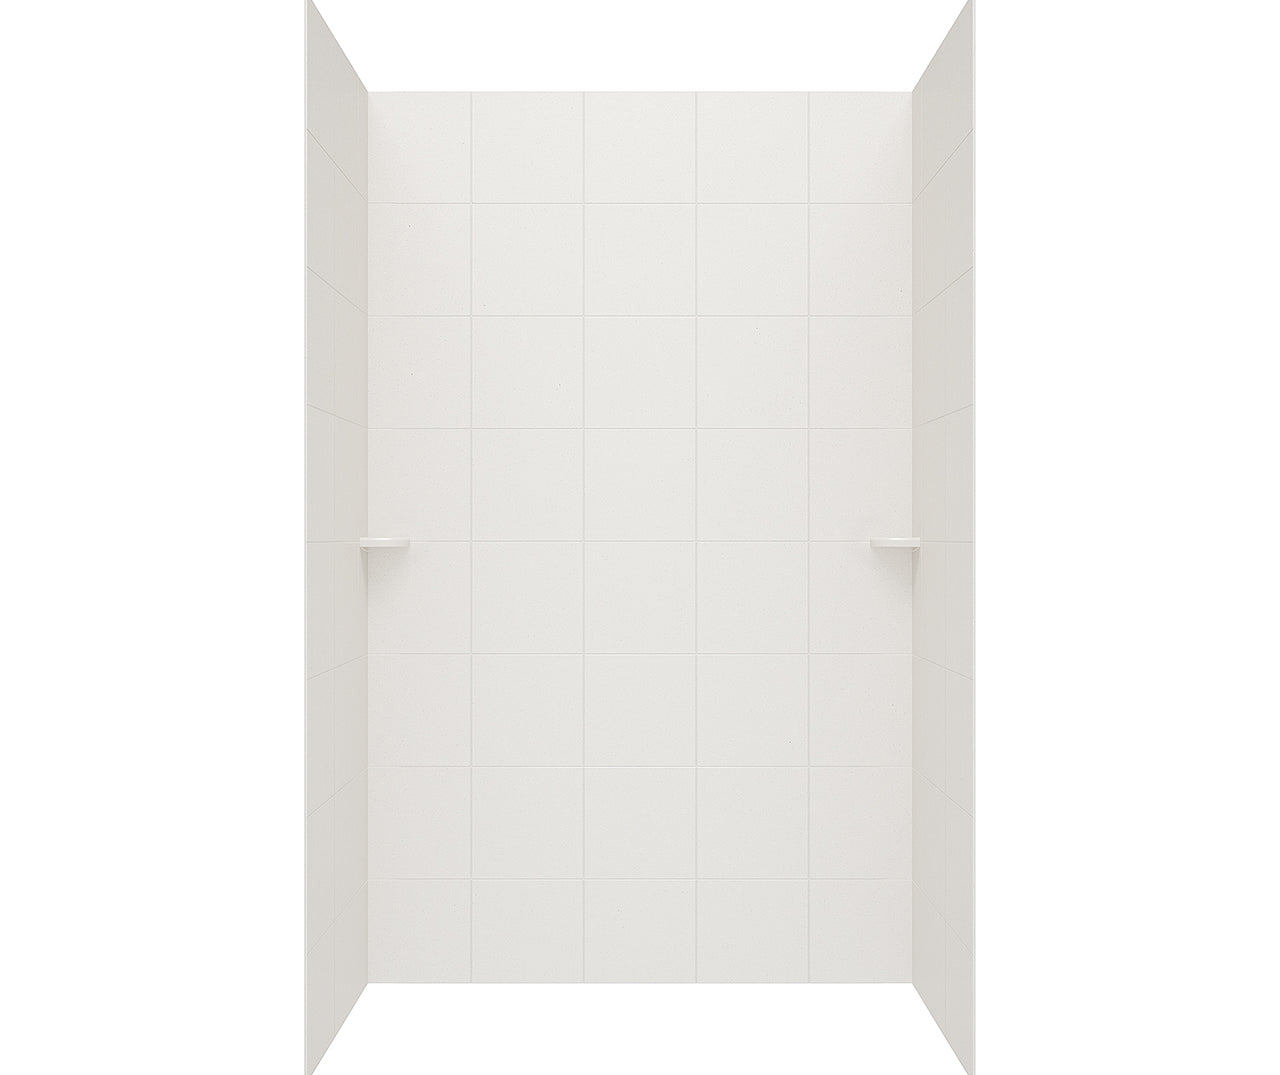 SQMK96-3662 36 x 62 x 96 Swanstone Square Tile Glue up Shower Wall Kit in Birch